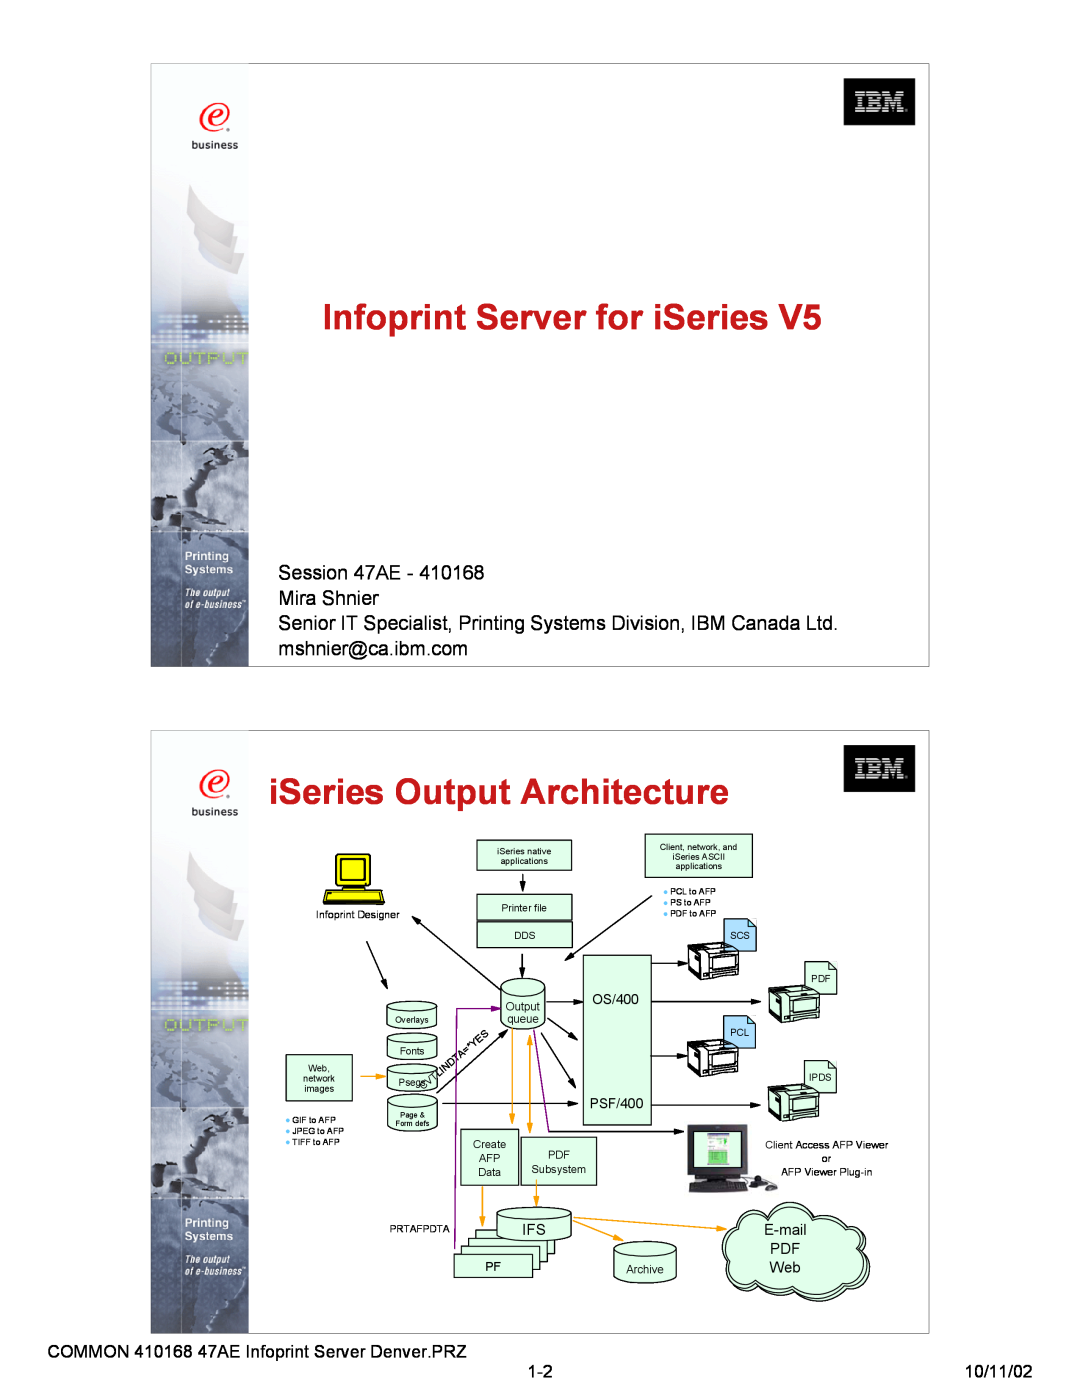 IBM manual Infoprint Server for iSeries, iSeries Output Architecture, Session 47AE - 410168 Mira Shnier, E-mail, OS/400 